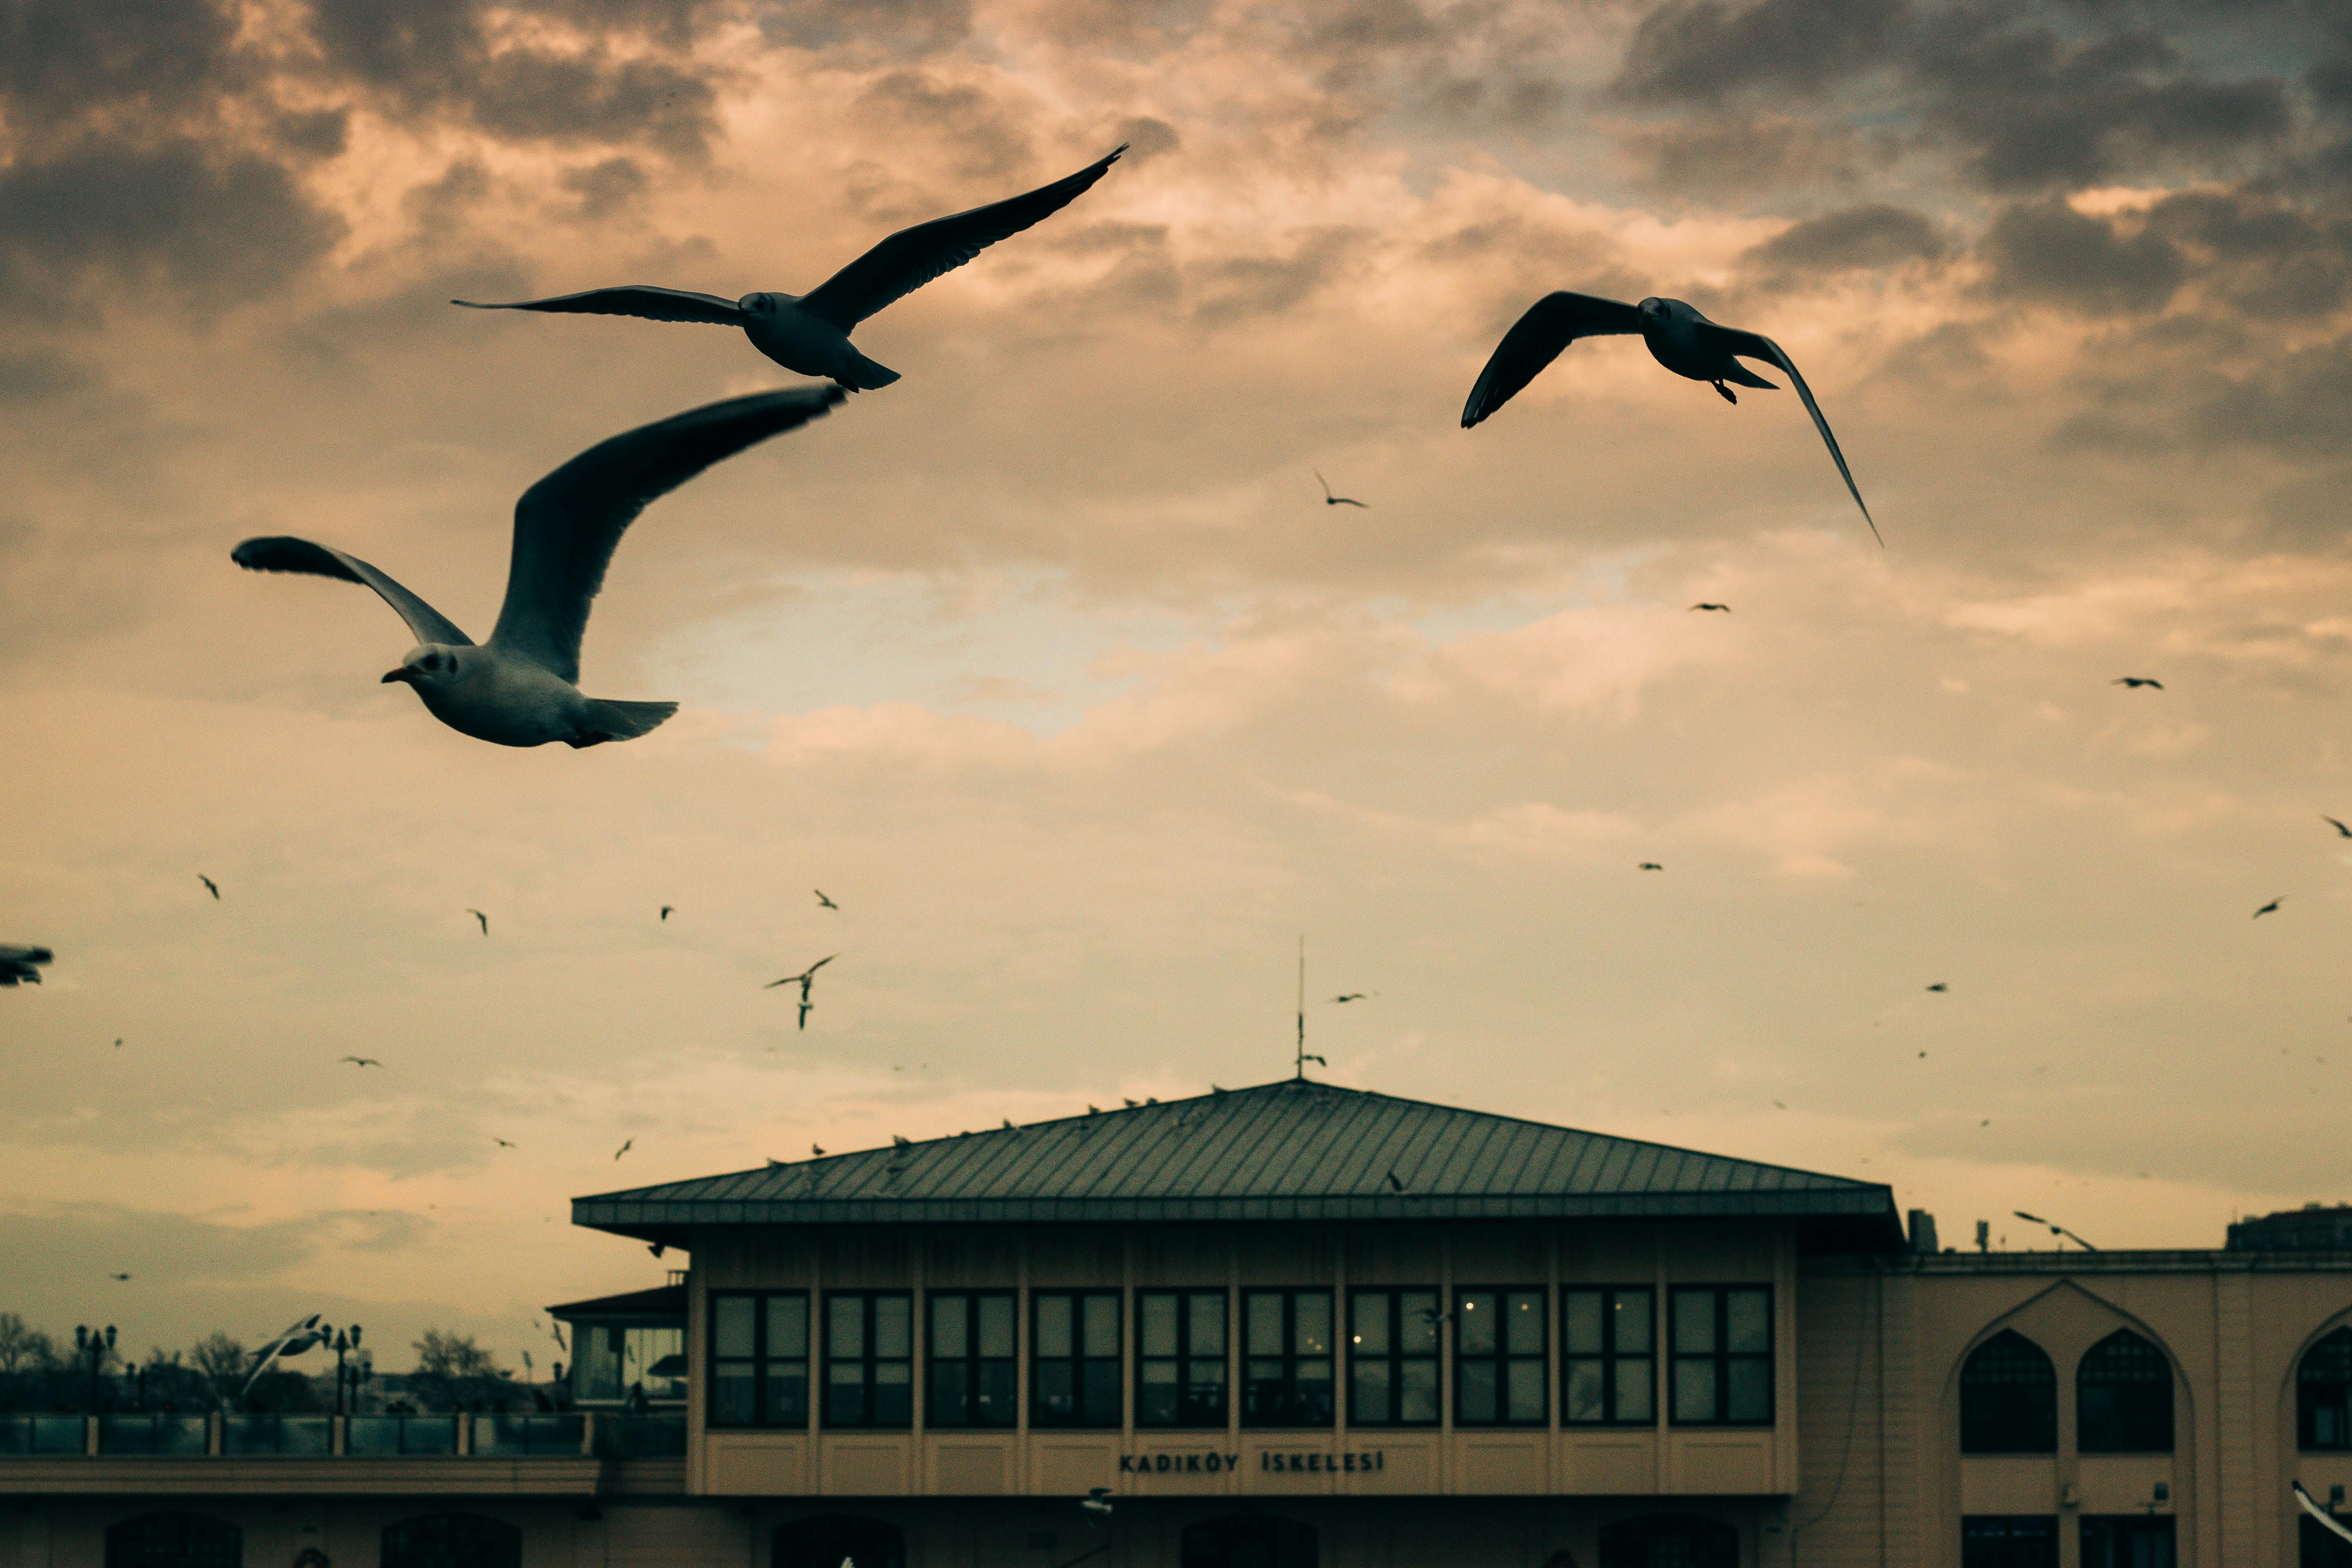 seagulls flying over modern buildings in evening sky